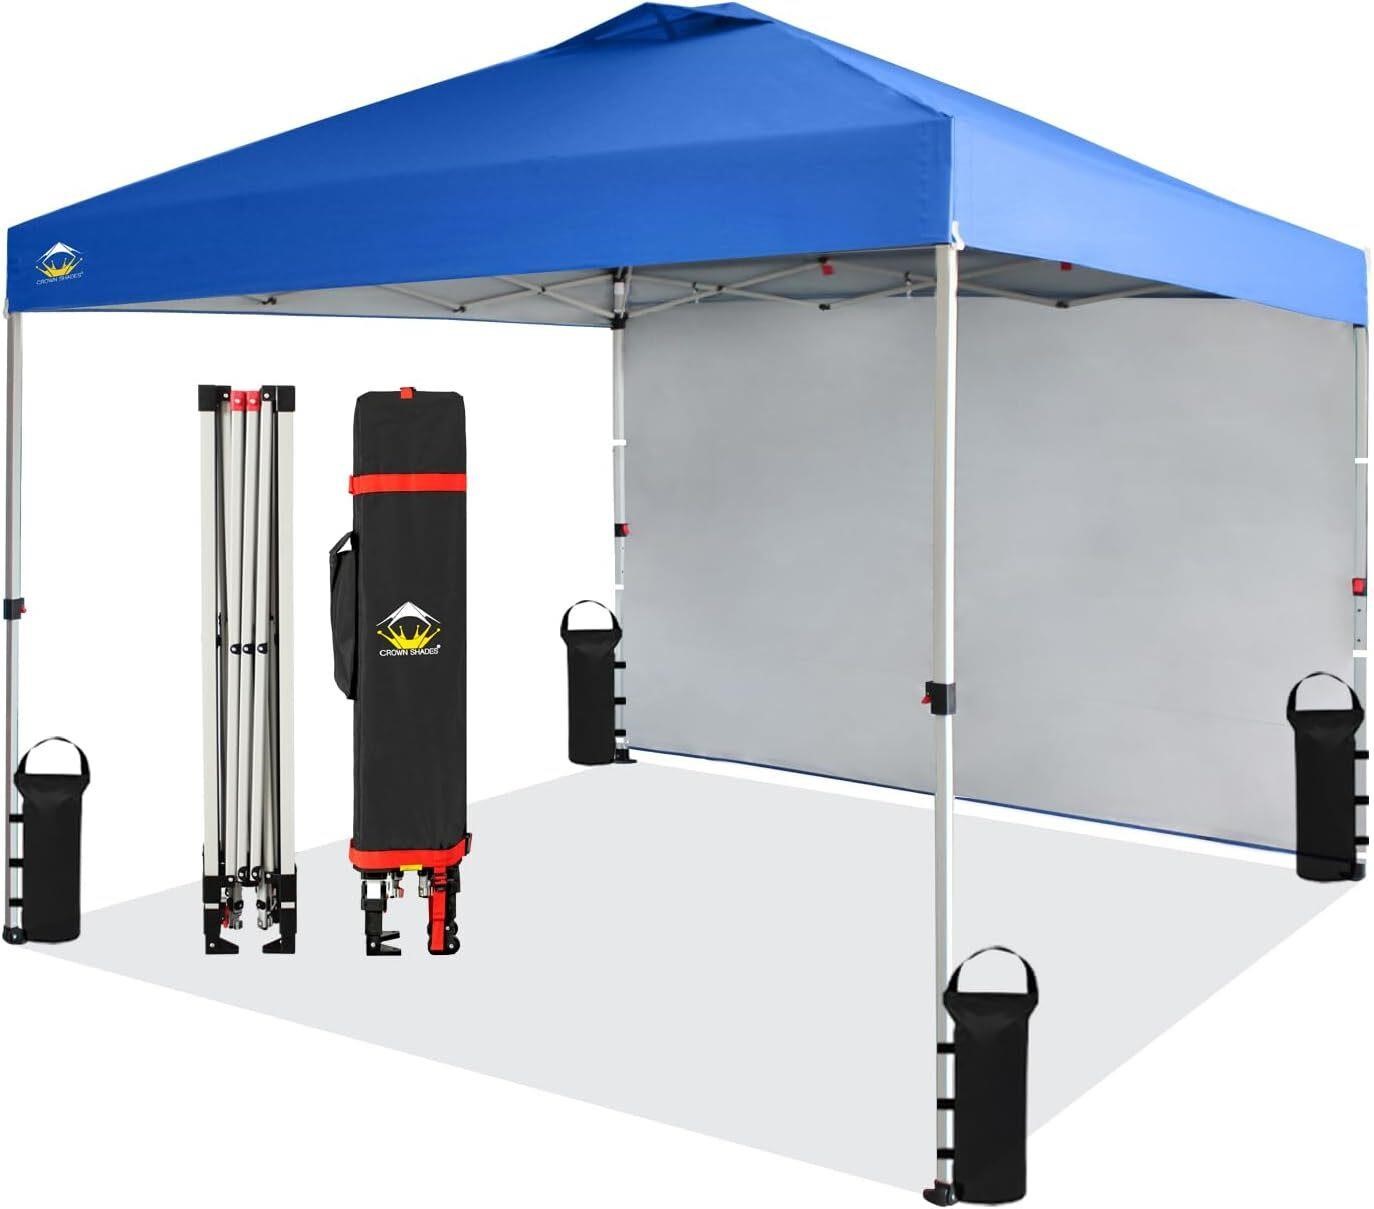 $133 Canopy Tent 10 x 10 Foot Portable